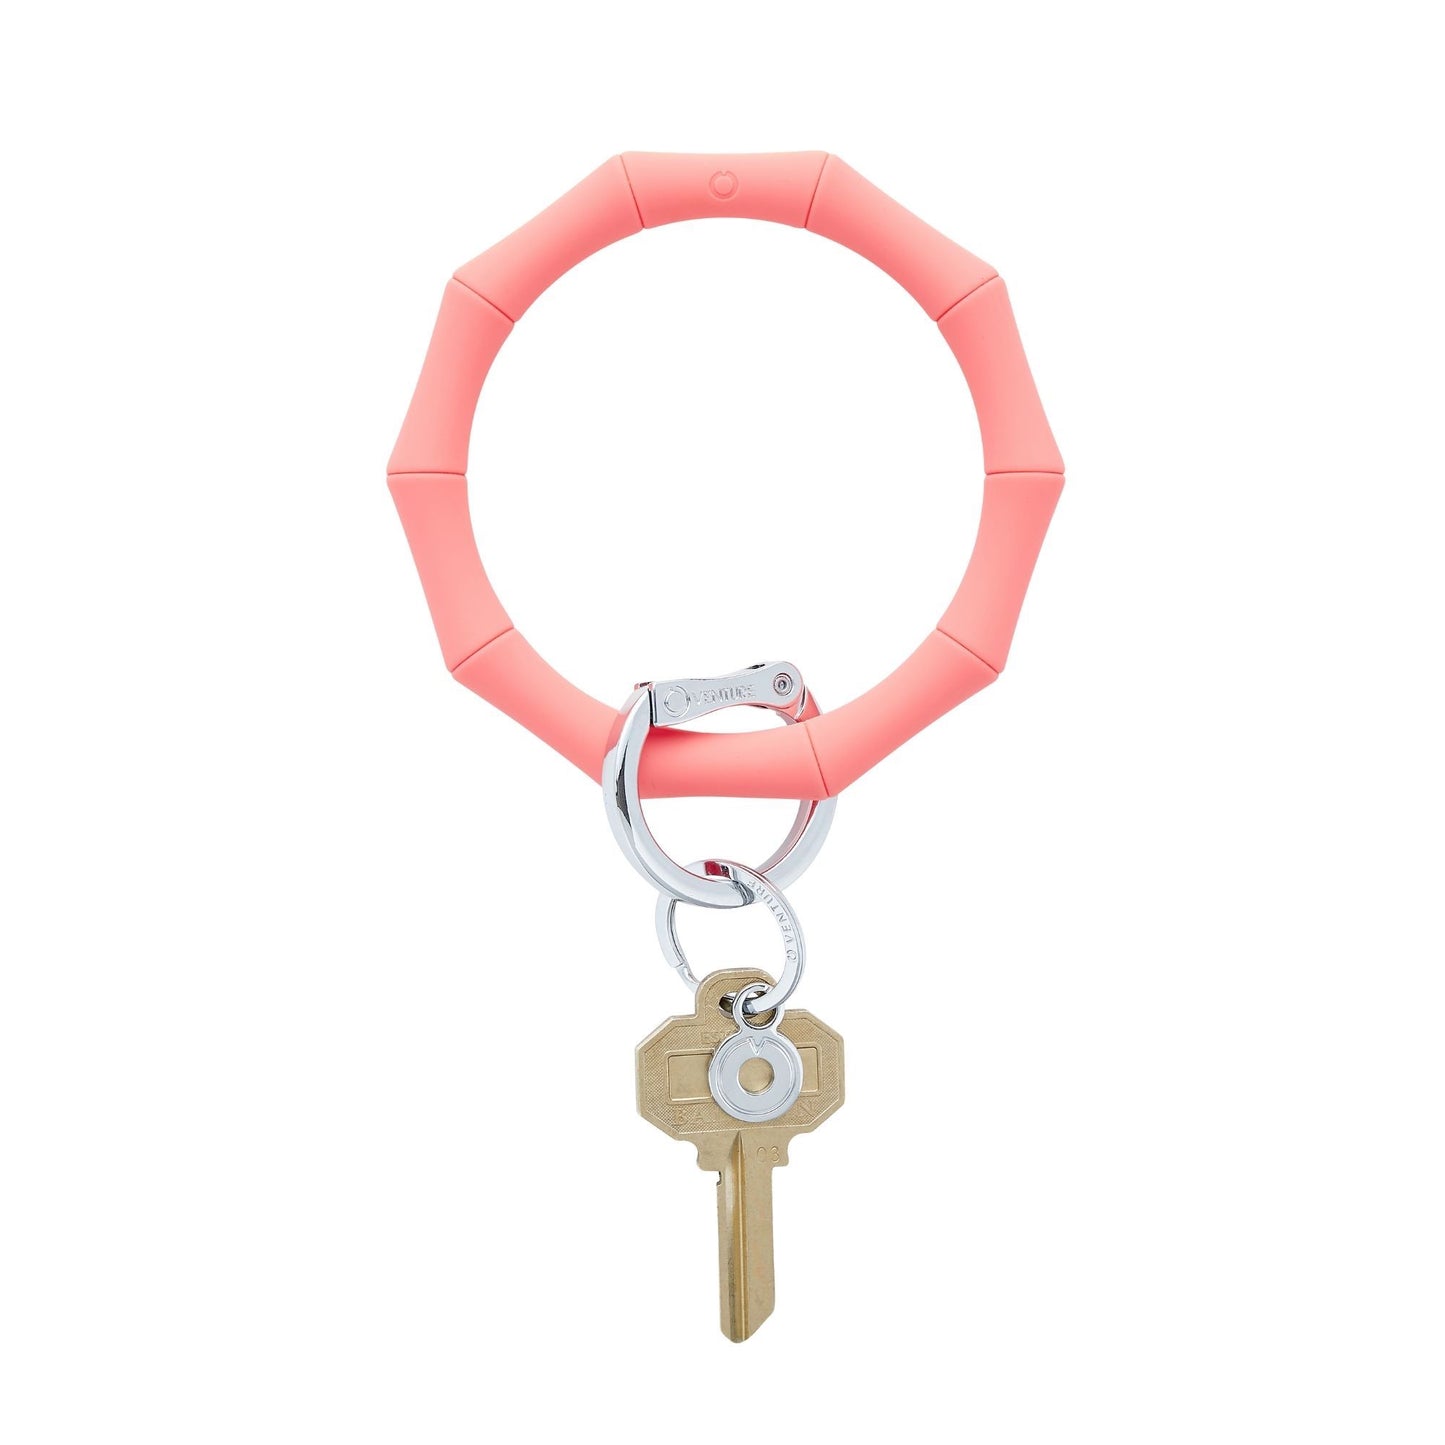 Coral Reef Bamboo Silicone Big O Key Ring by Oventure